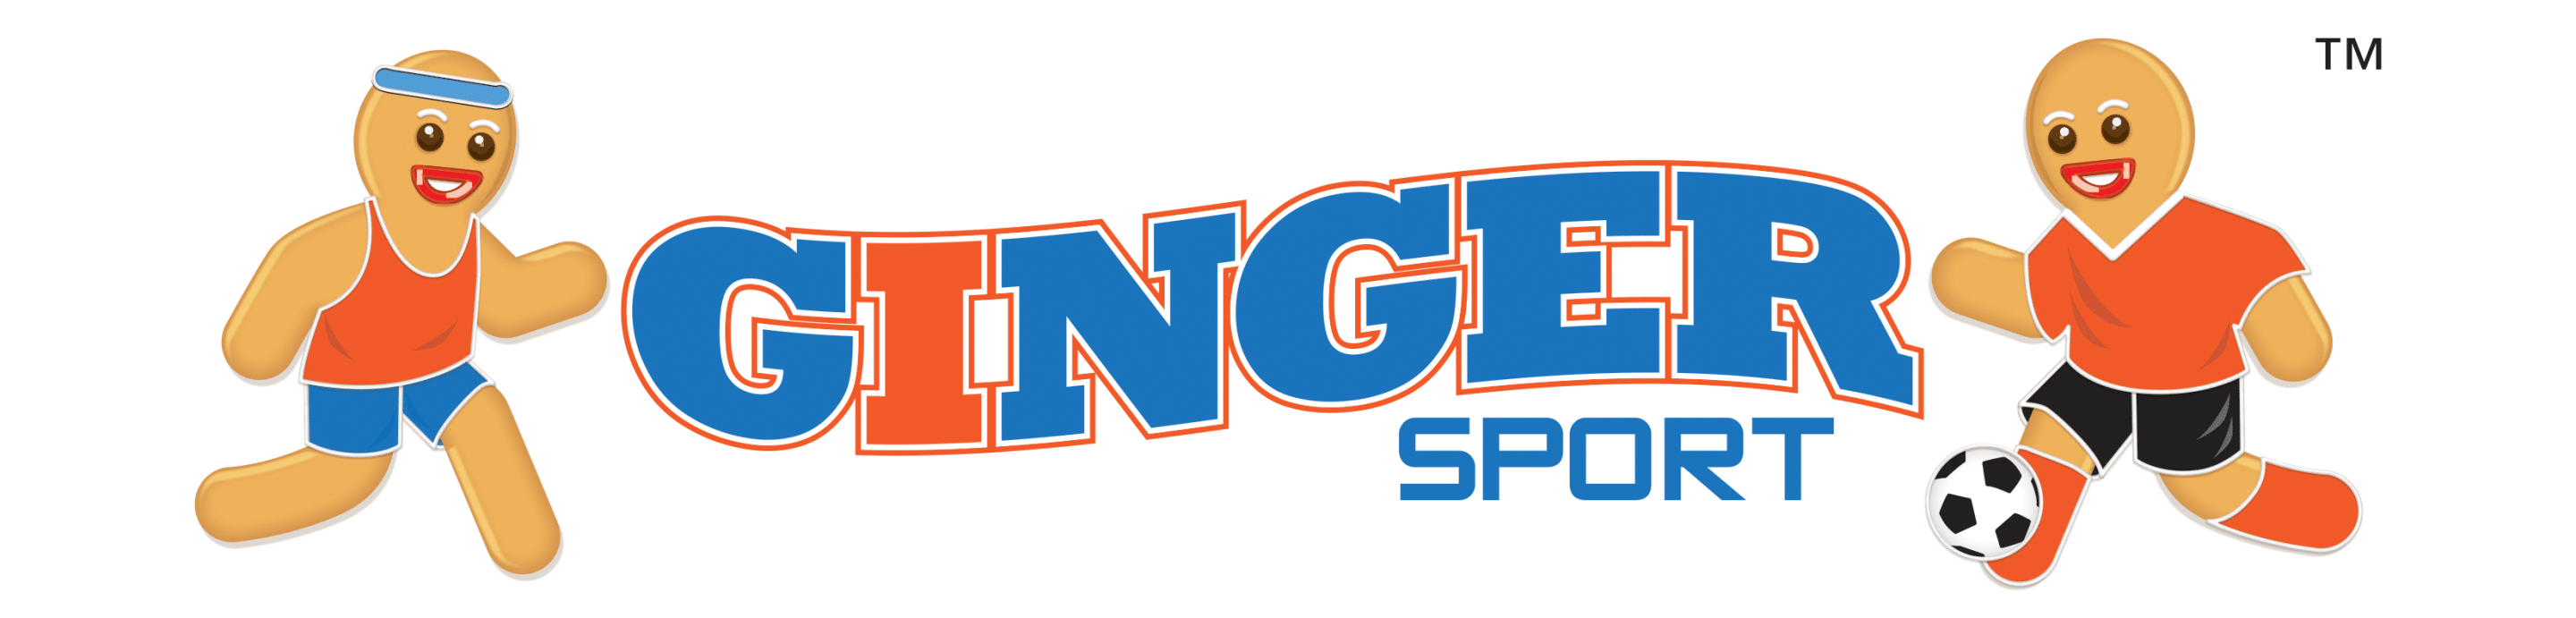 logo featuring ginger bread people playing soccer and the words "Ginger Sport"